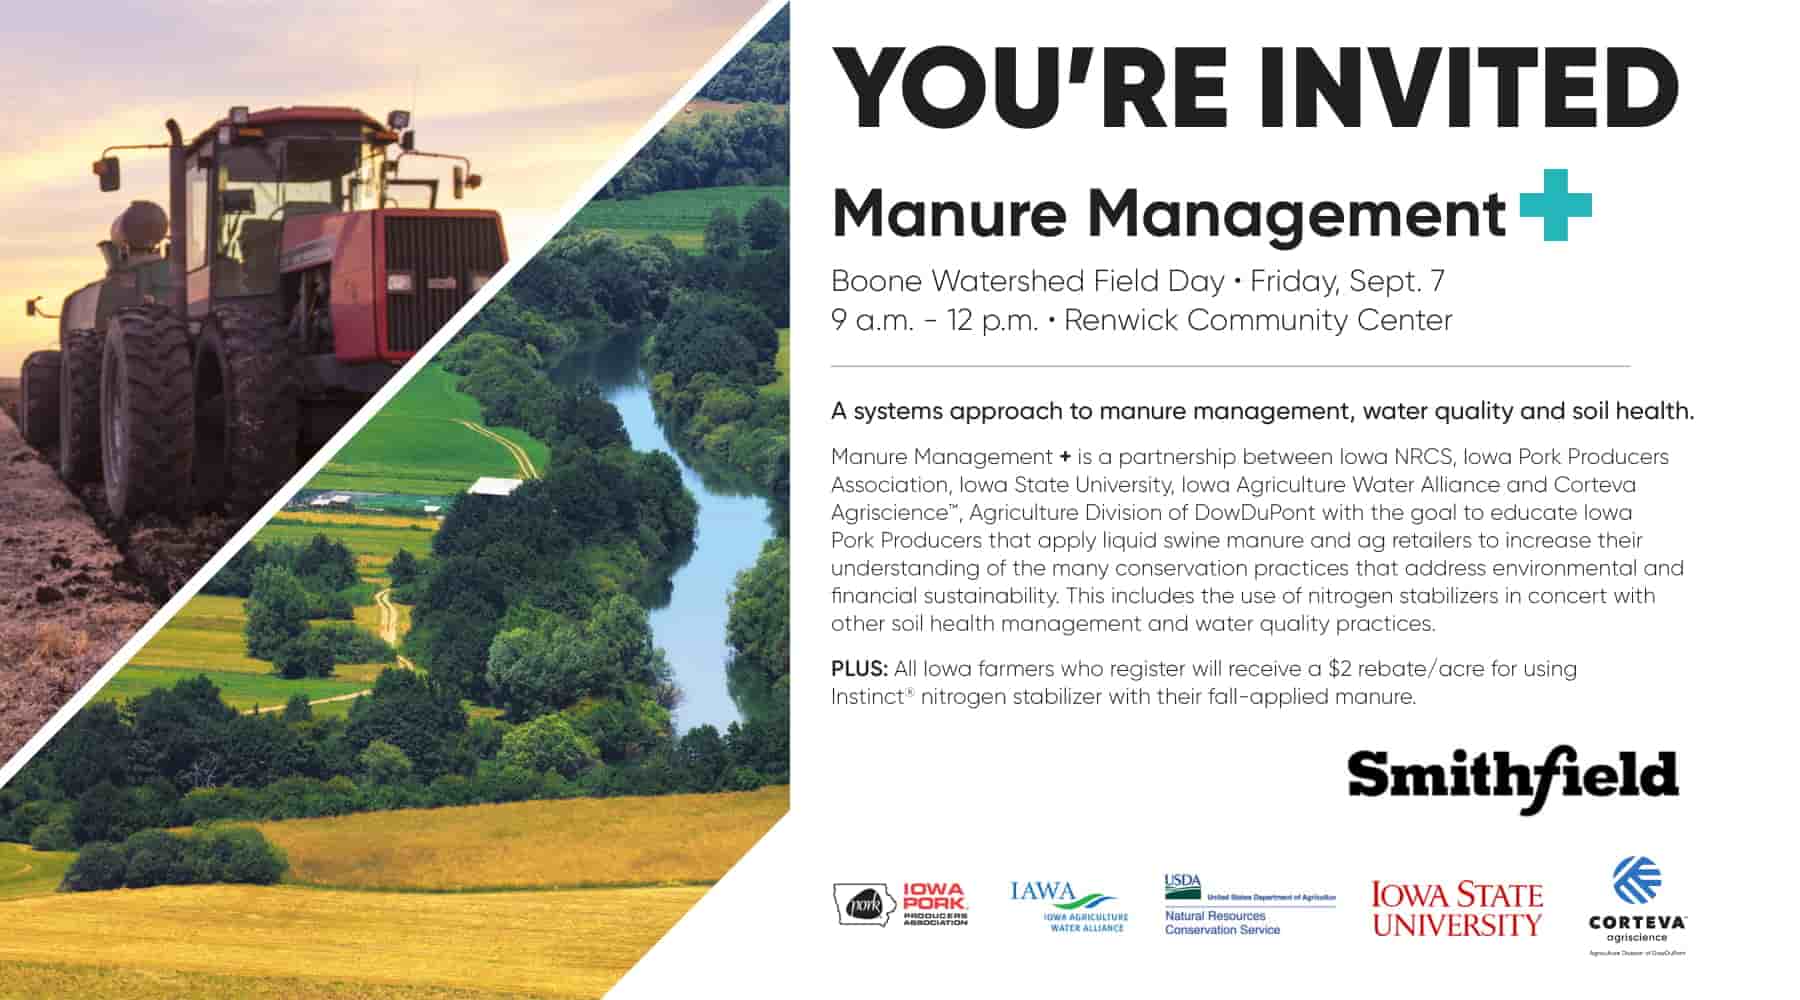 "You're Invited" flyer for the Manure Management Plus field day in the Boone Watershed